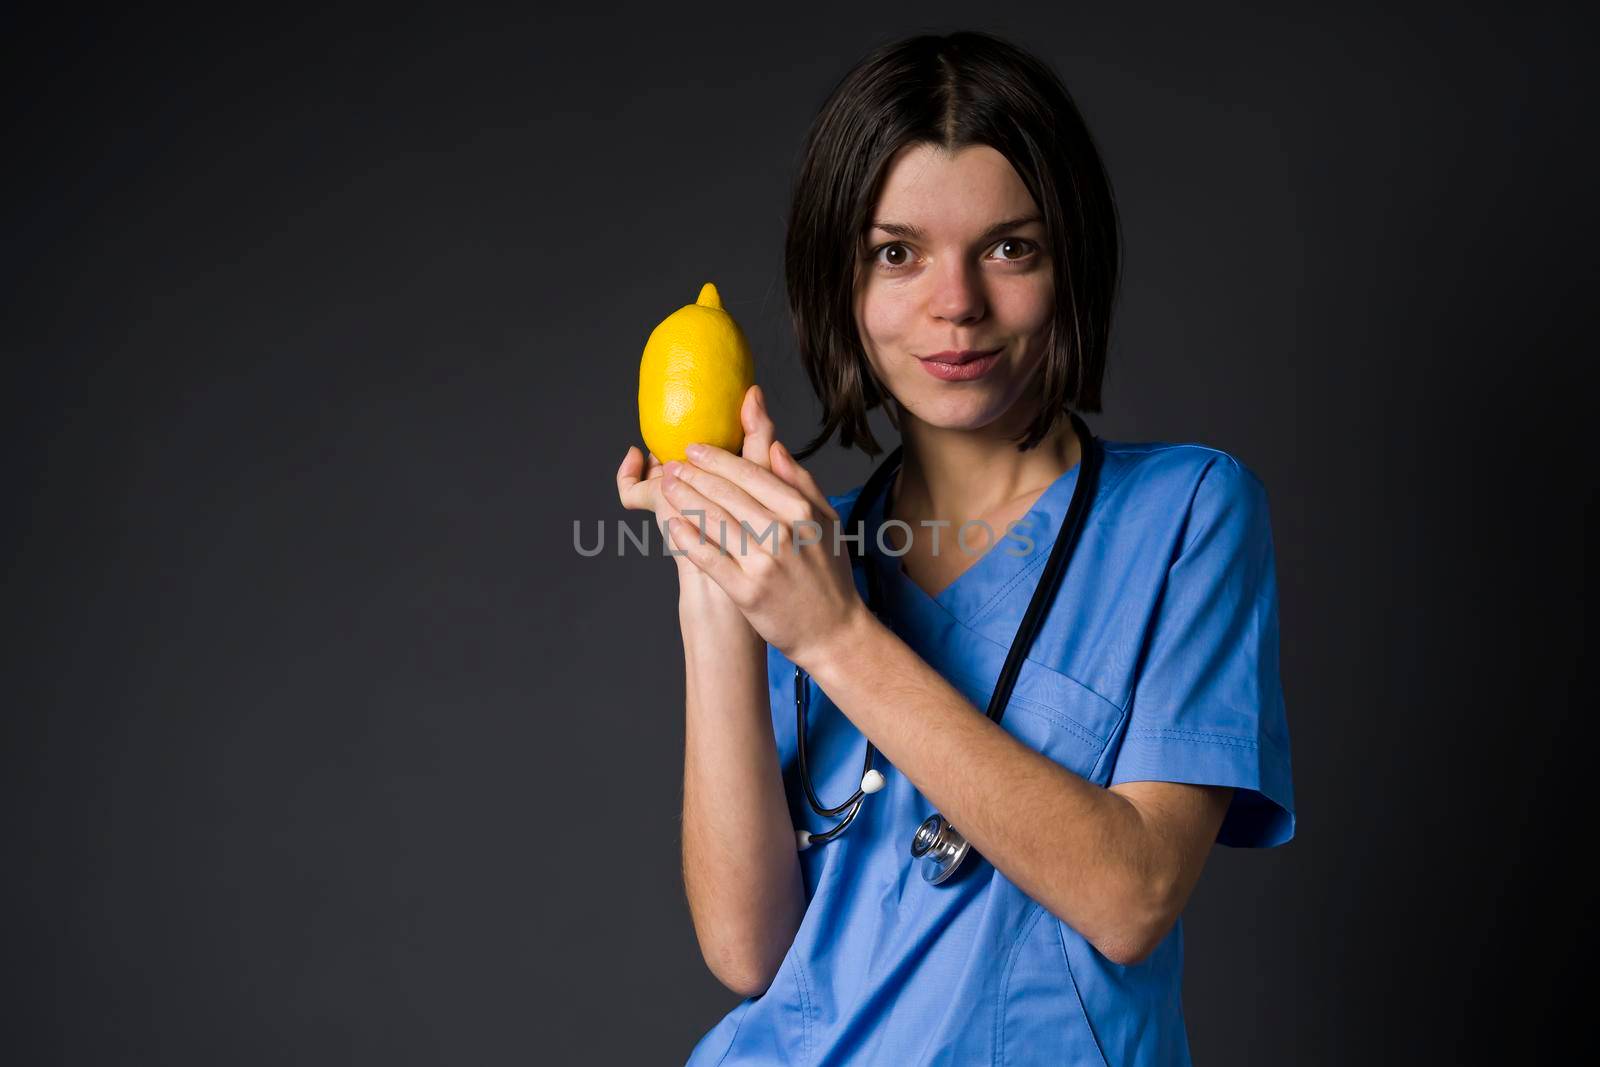 A young girl cheerful doctor in a blue medical suit and with a stethoscope holds a lemon fruit in her hands and smiles. The nurse is holding a nutritious fruit containing vitamin C.